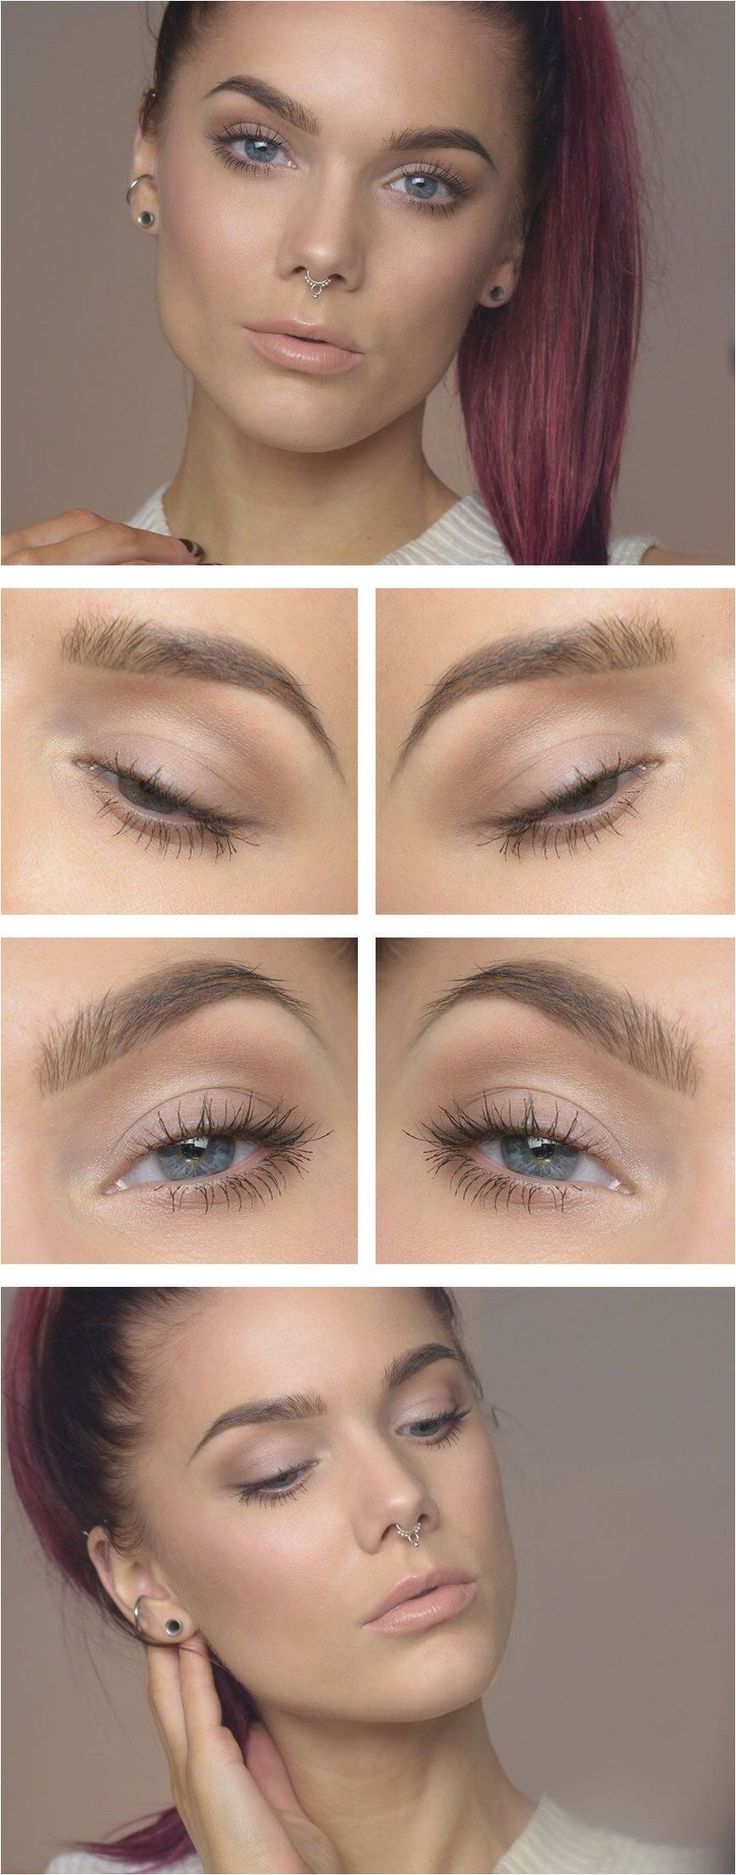 Makeup Ideas. Increase beauty to stunning new levels using branded beauty produc...